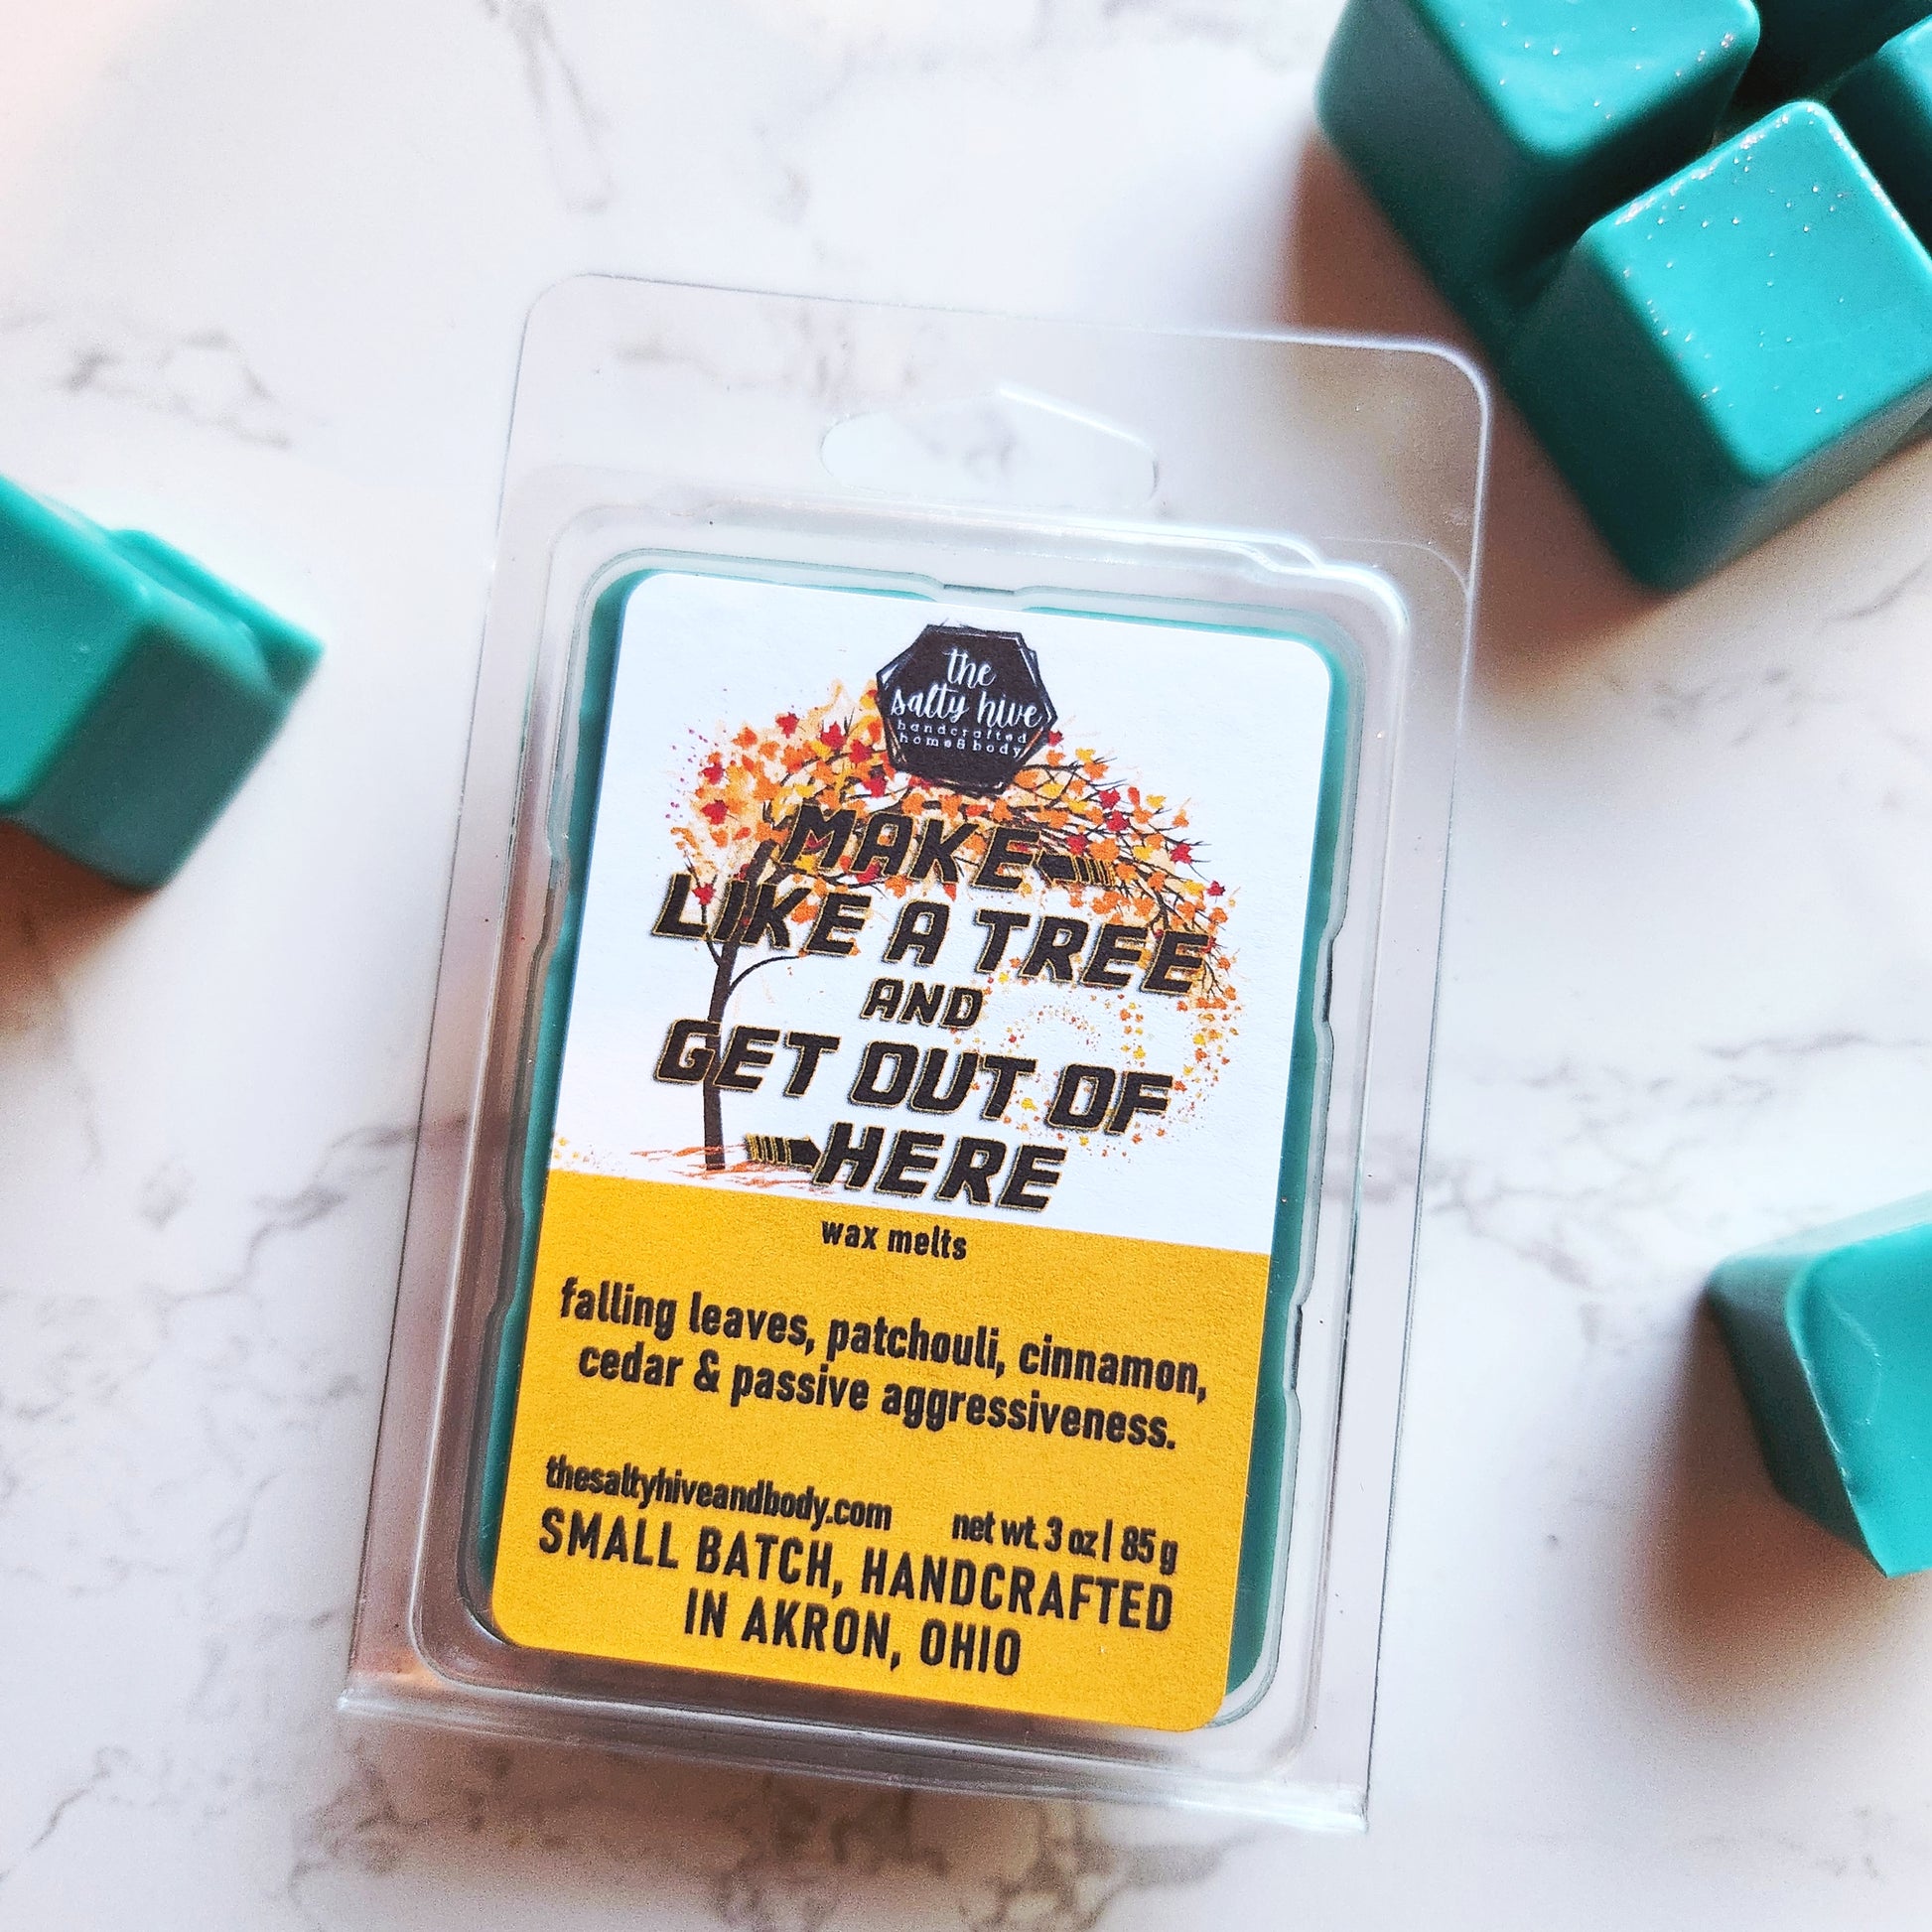 make like a tree and get out of here wax melts - the salty hive